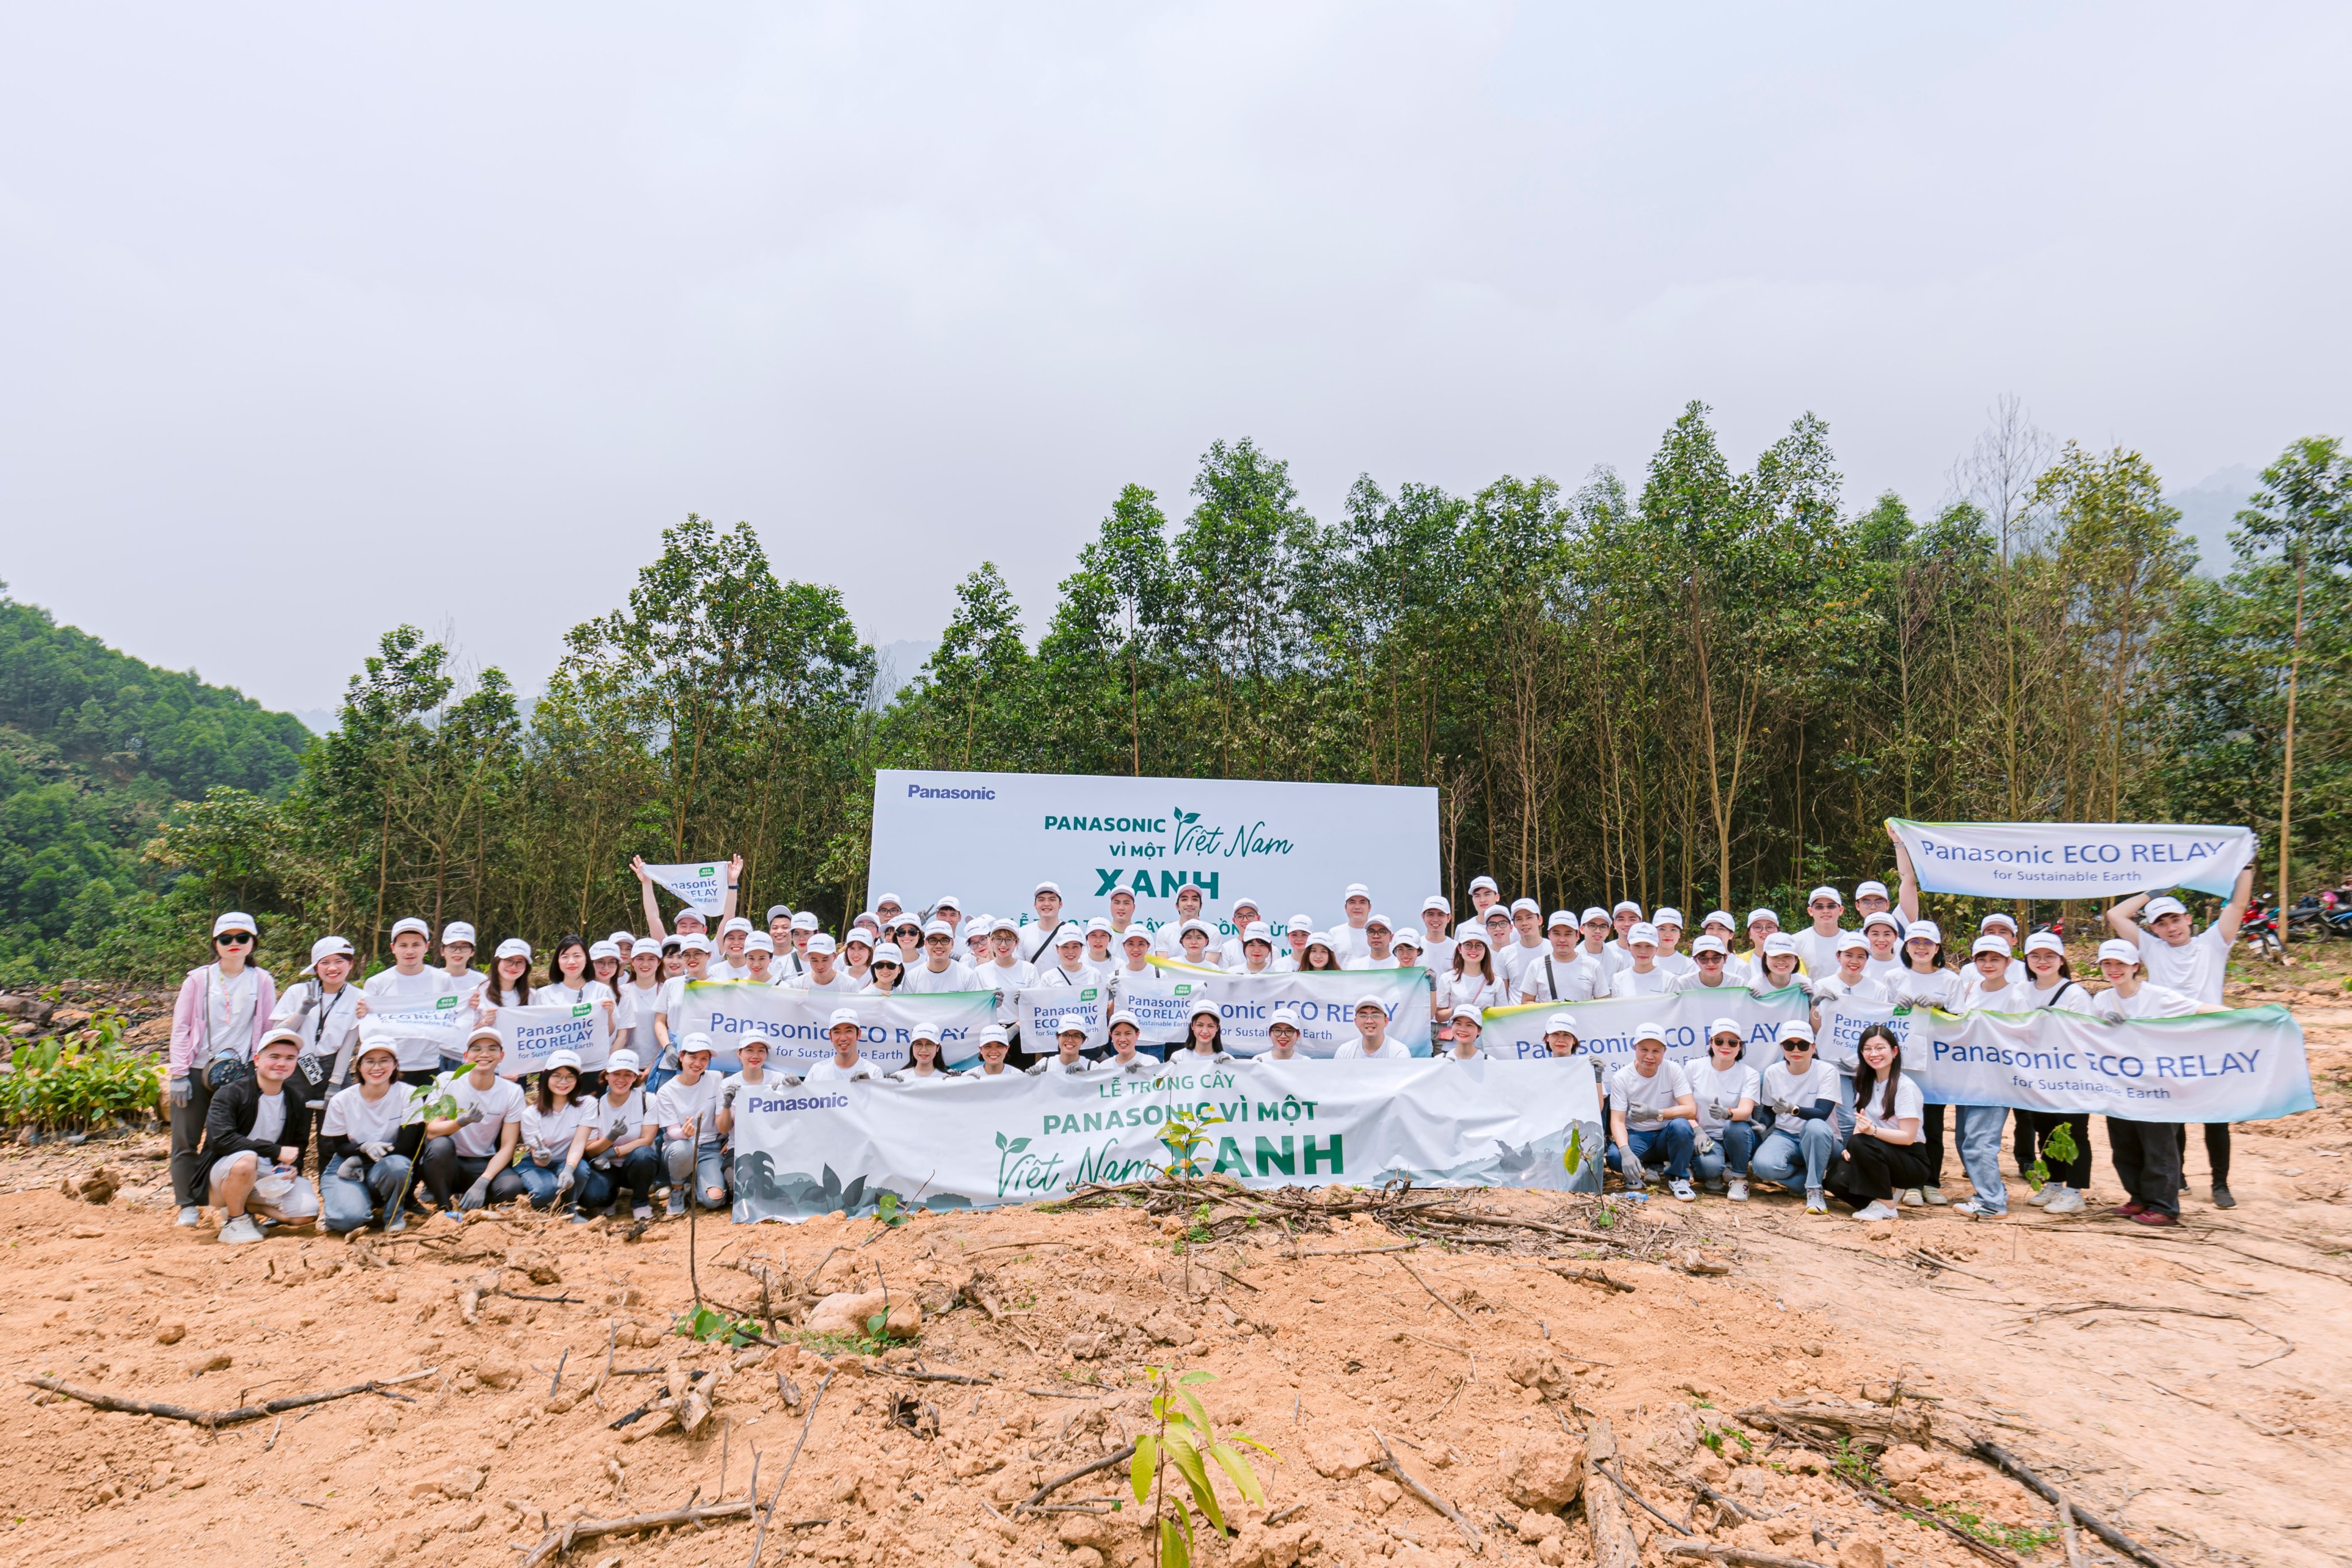 Panasonic remark its 10 years journey of Eco relay contributing “for a Green Vietnam”